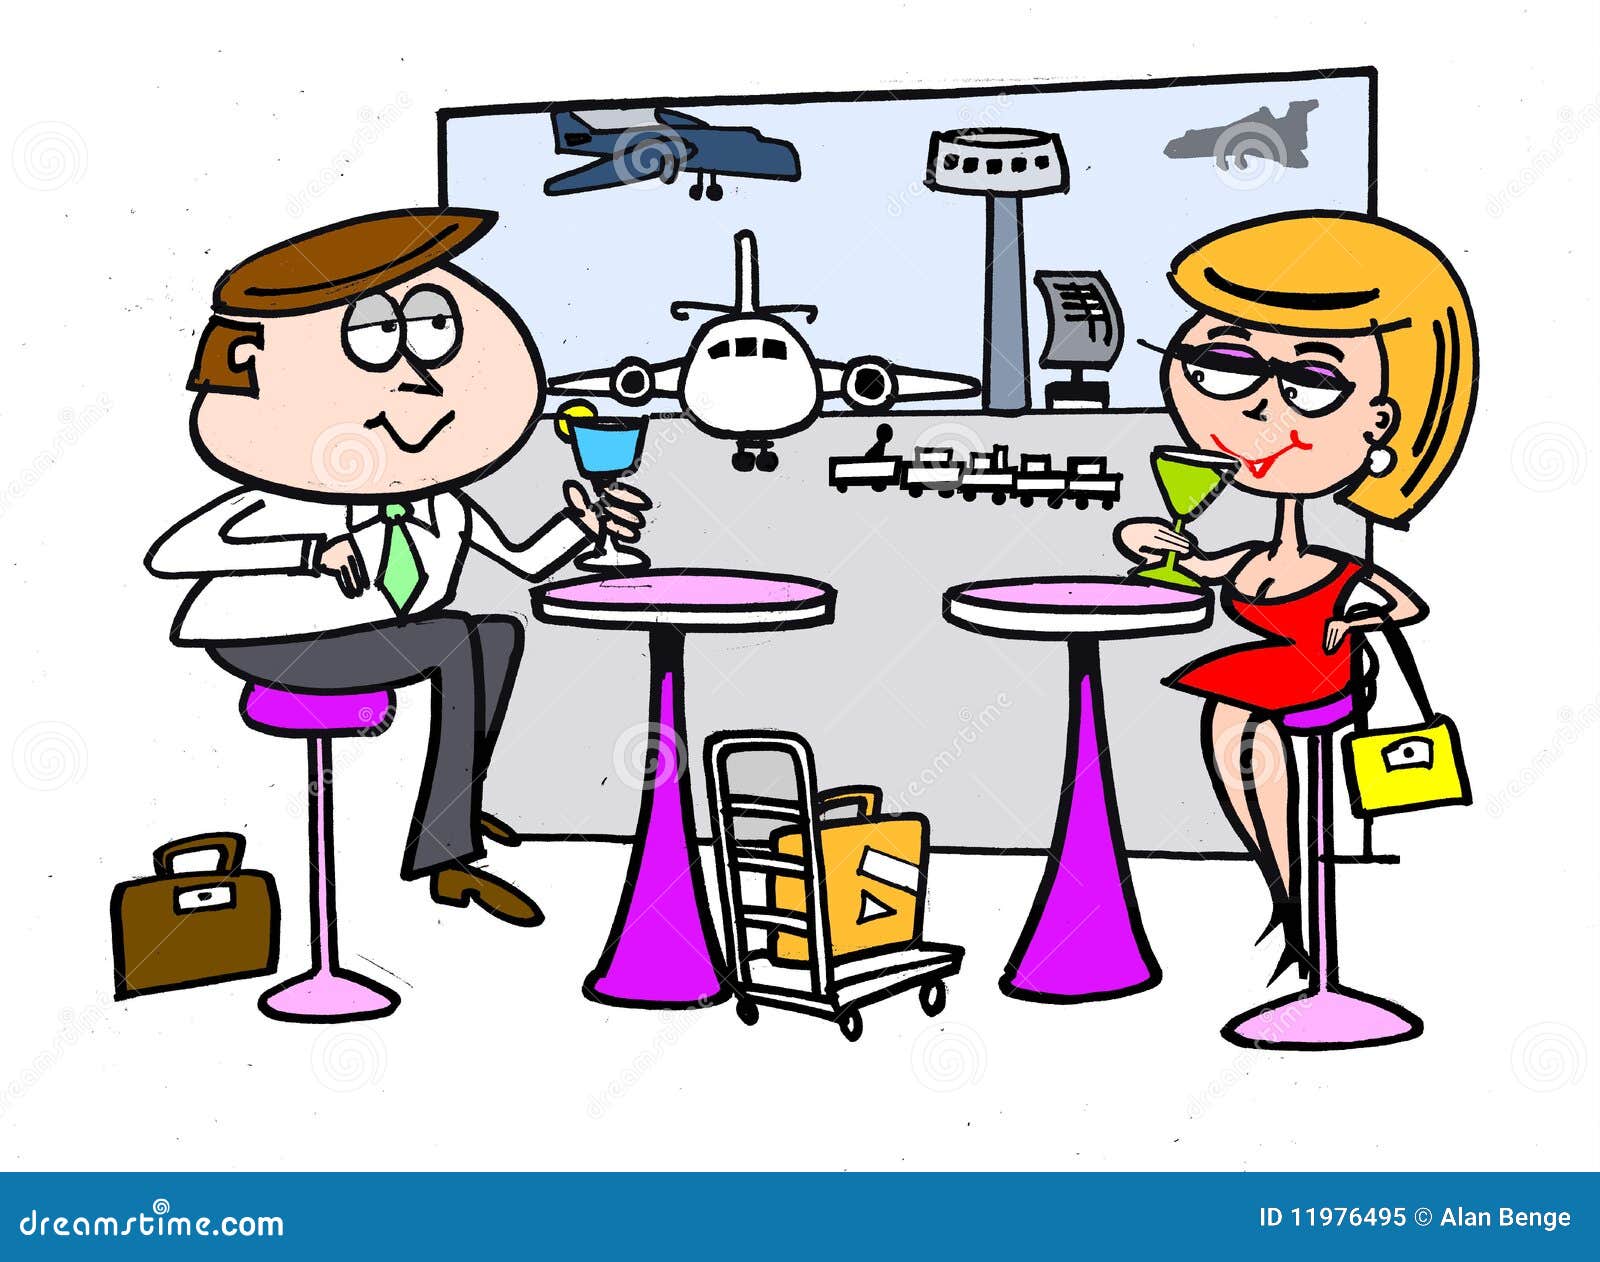 airport safety clipart - photo #17